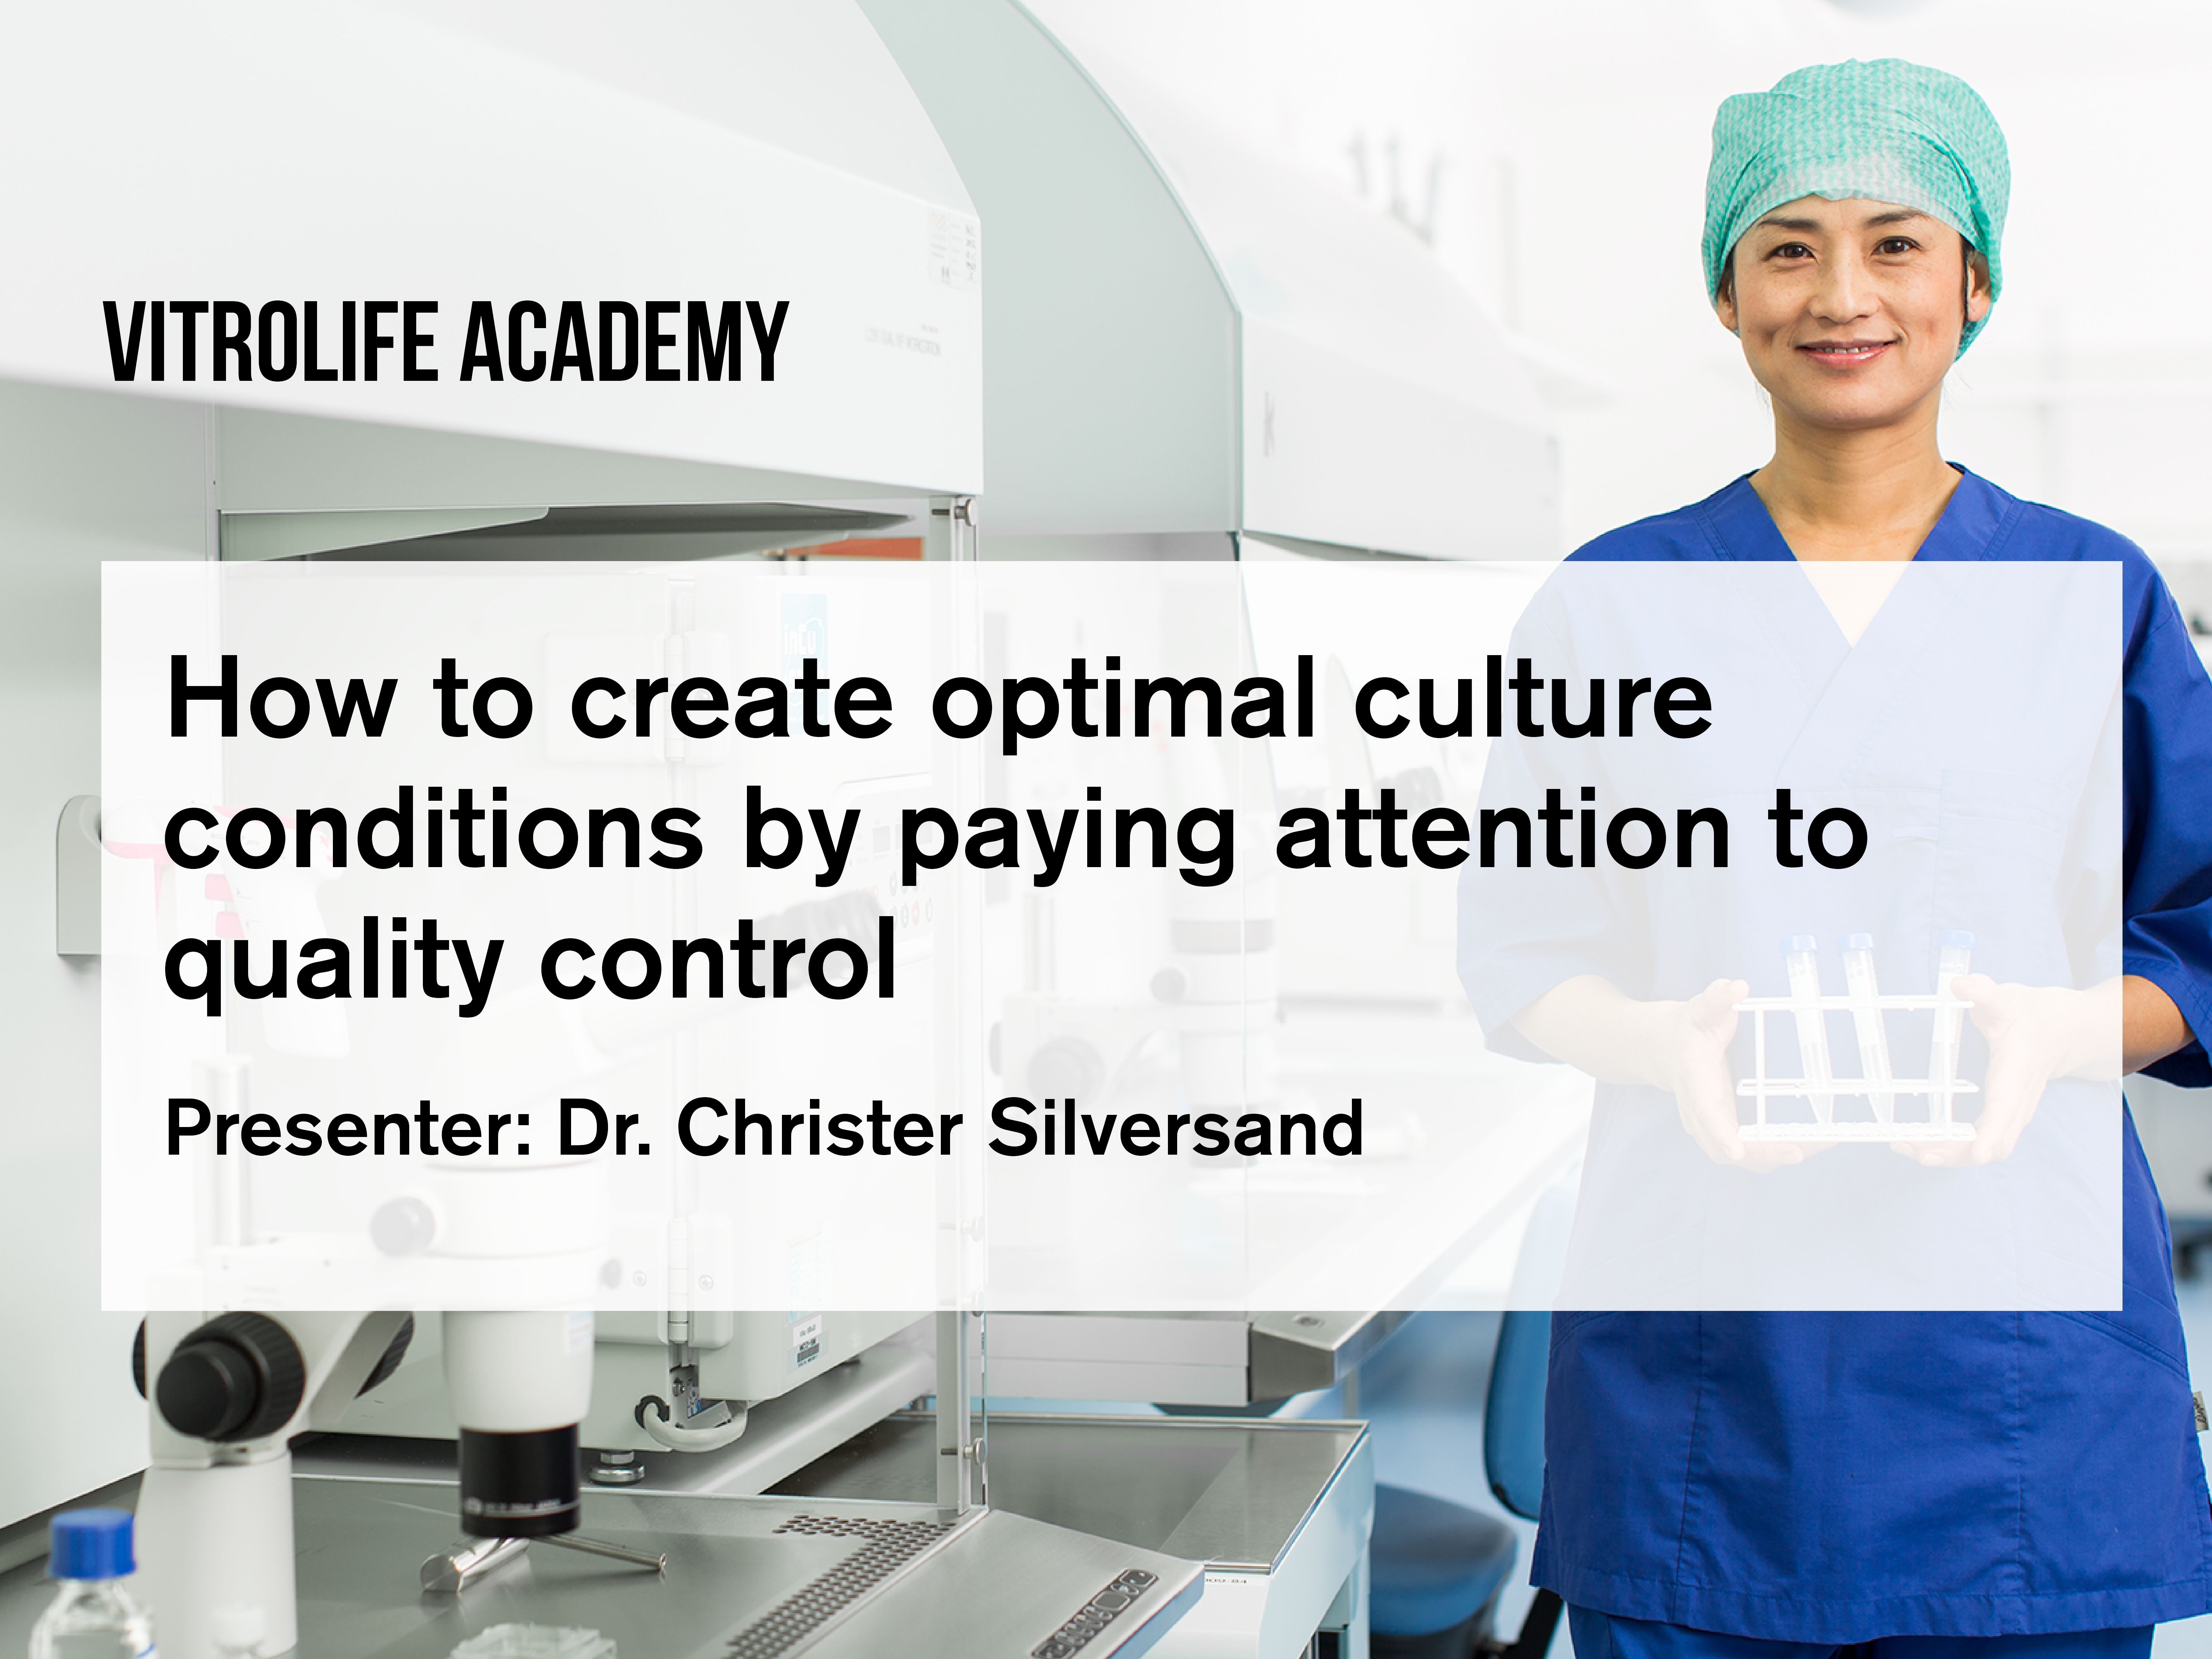 2017_November_How to create optimal culture conditions by paying attention to quality control_1440x1080_v2